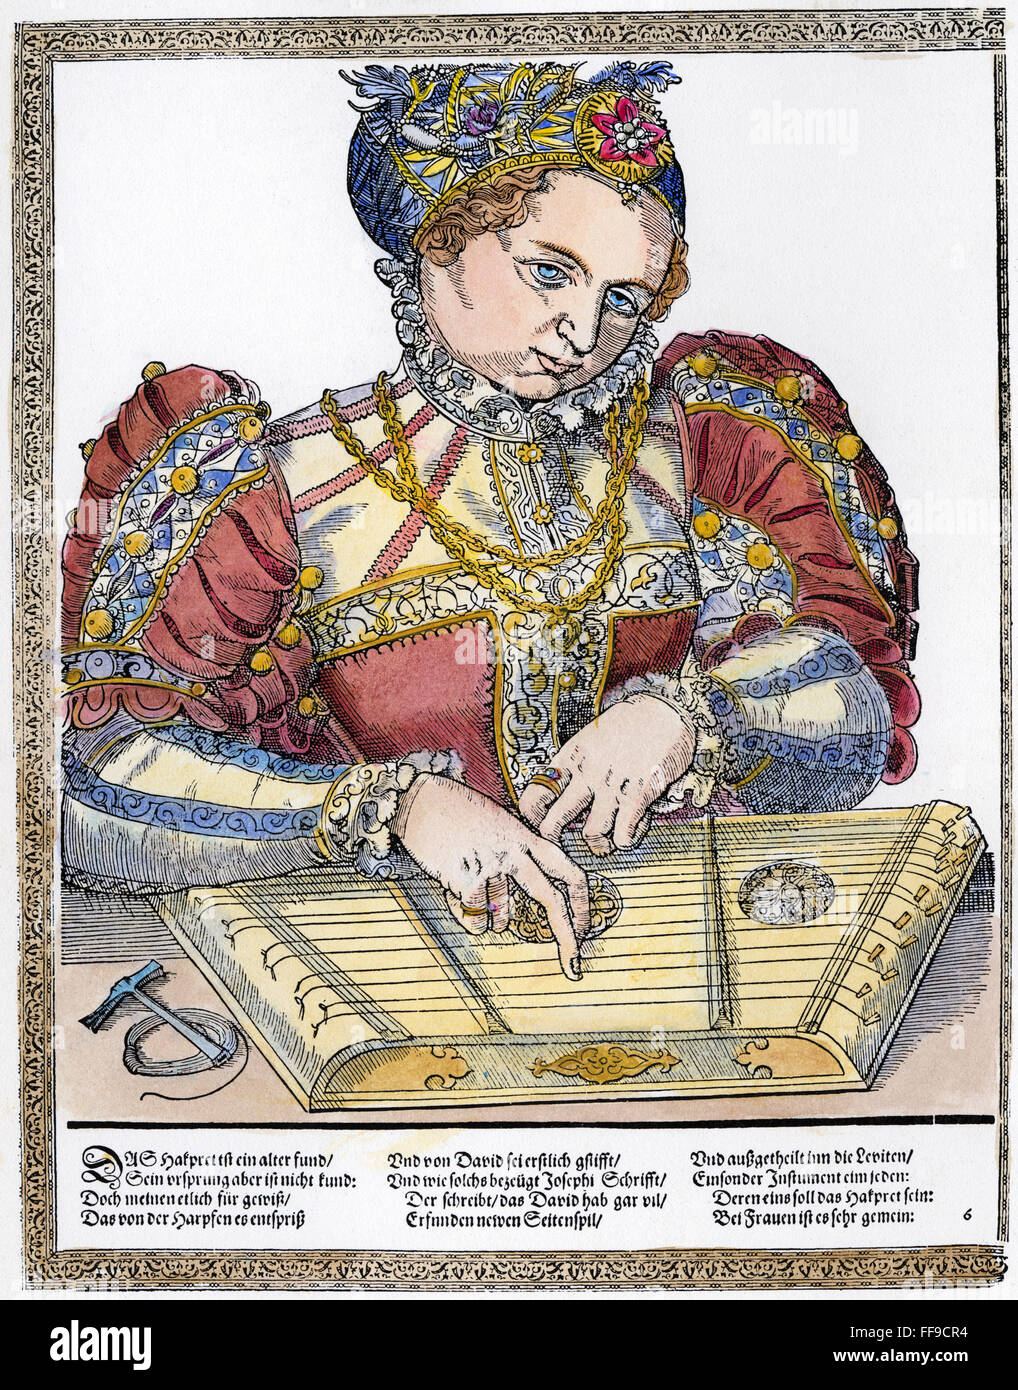 ZITHER PLAYER, 16th CENTURY. /nGerman woodcut by Tobias Stimmer (1539-1584). Stock Photo